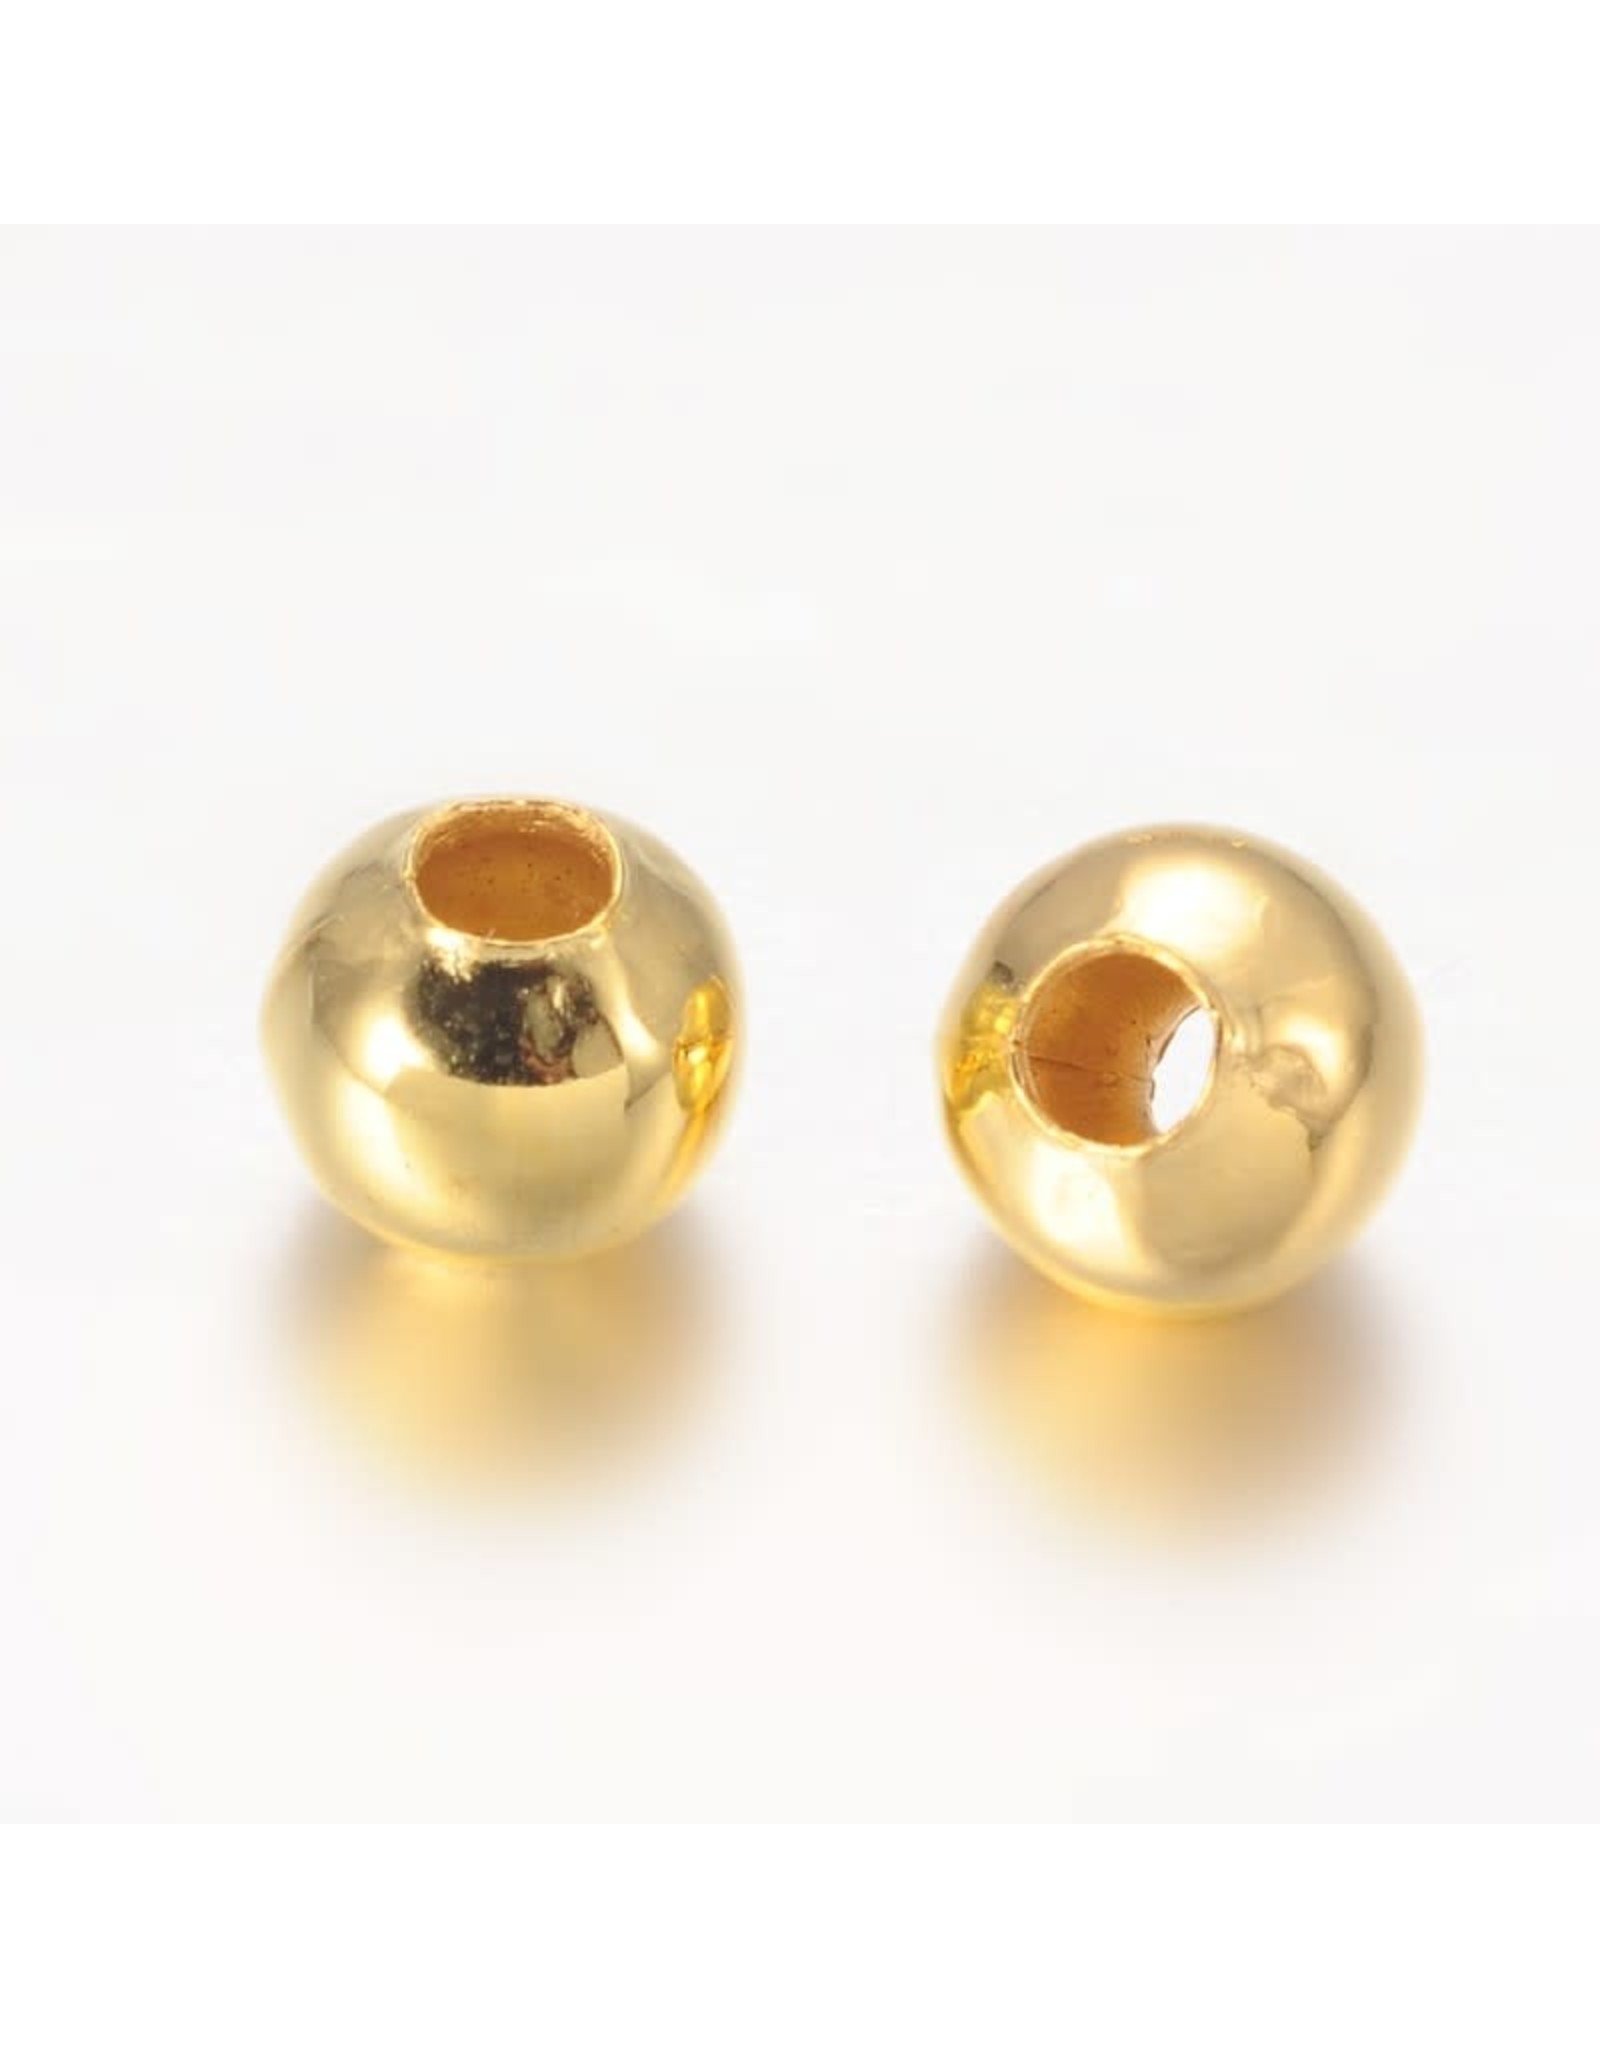 Spacer Bead Round 3mm  Gold  x100